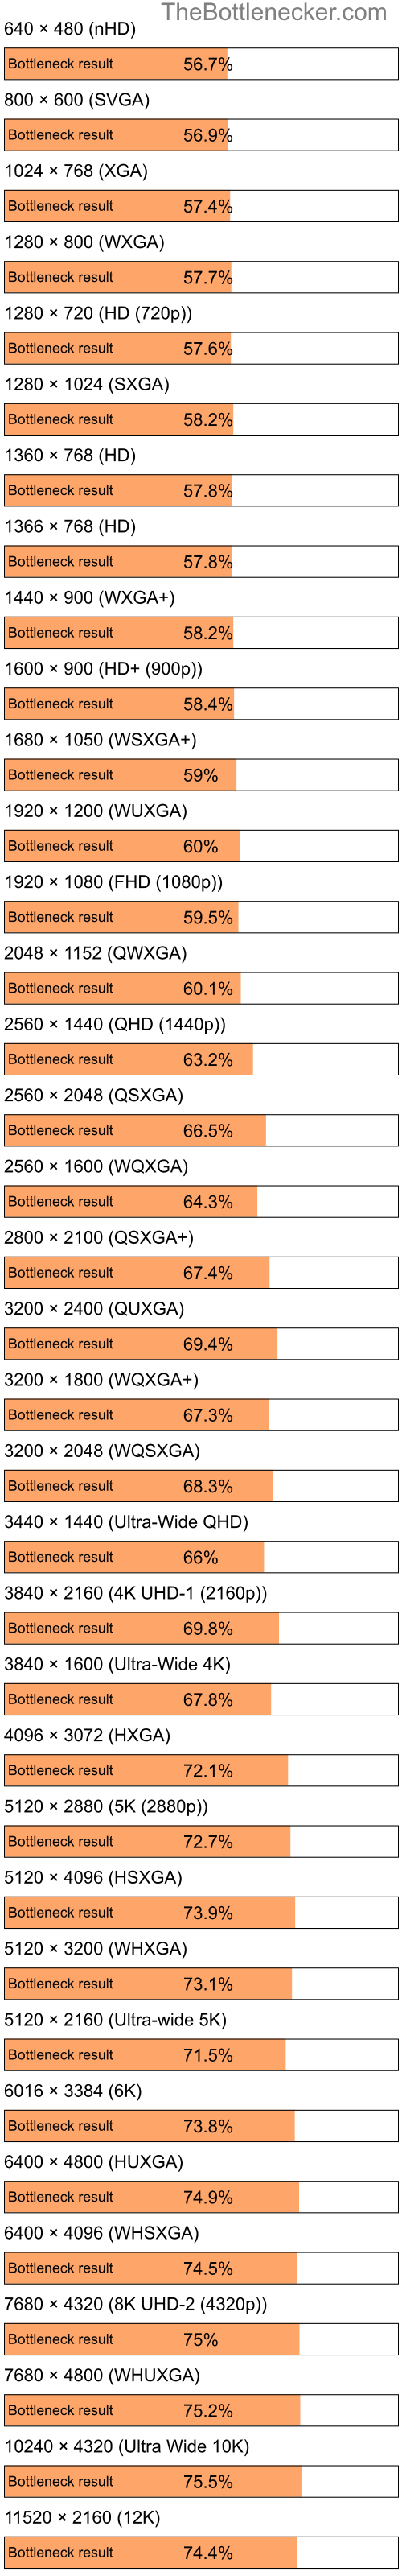 Bottleneck results by resolution for Intel Celeron and NVIDIA Quadro FX 540 in Processor Intense Tasks